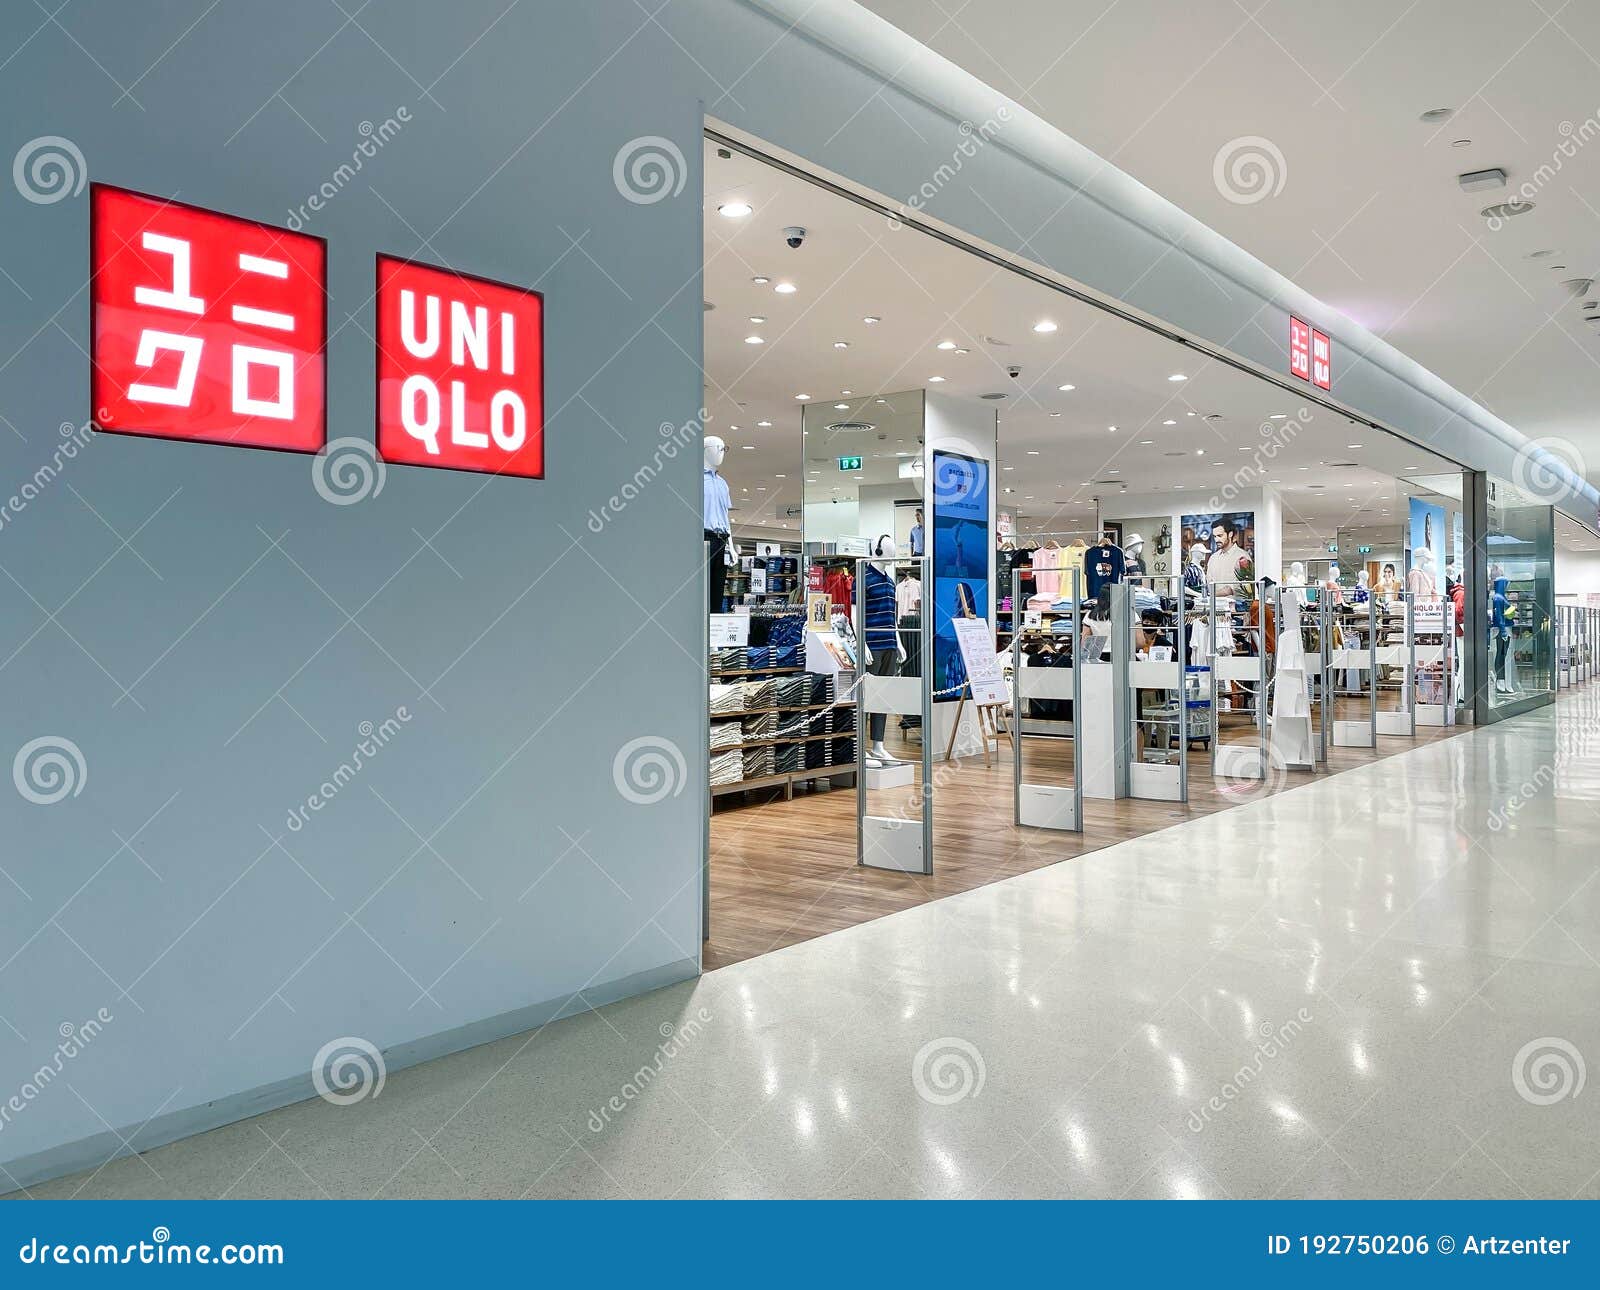 Uniqlo Logo In Front Of The Store Editorial Photo Image Of Advertisement Brand 192750206